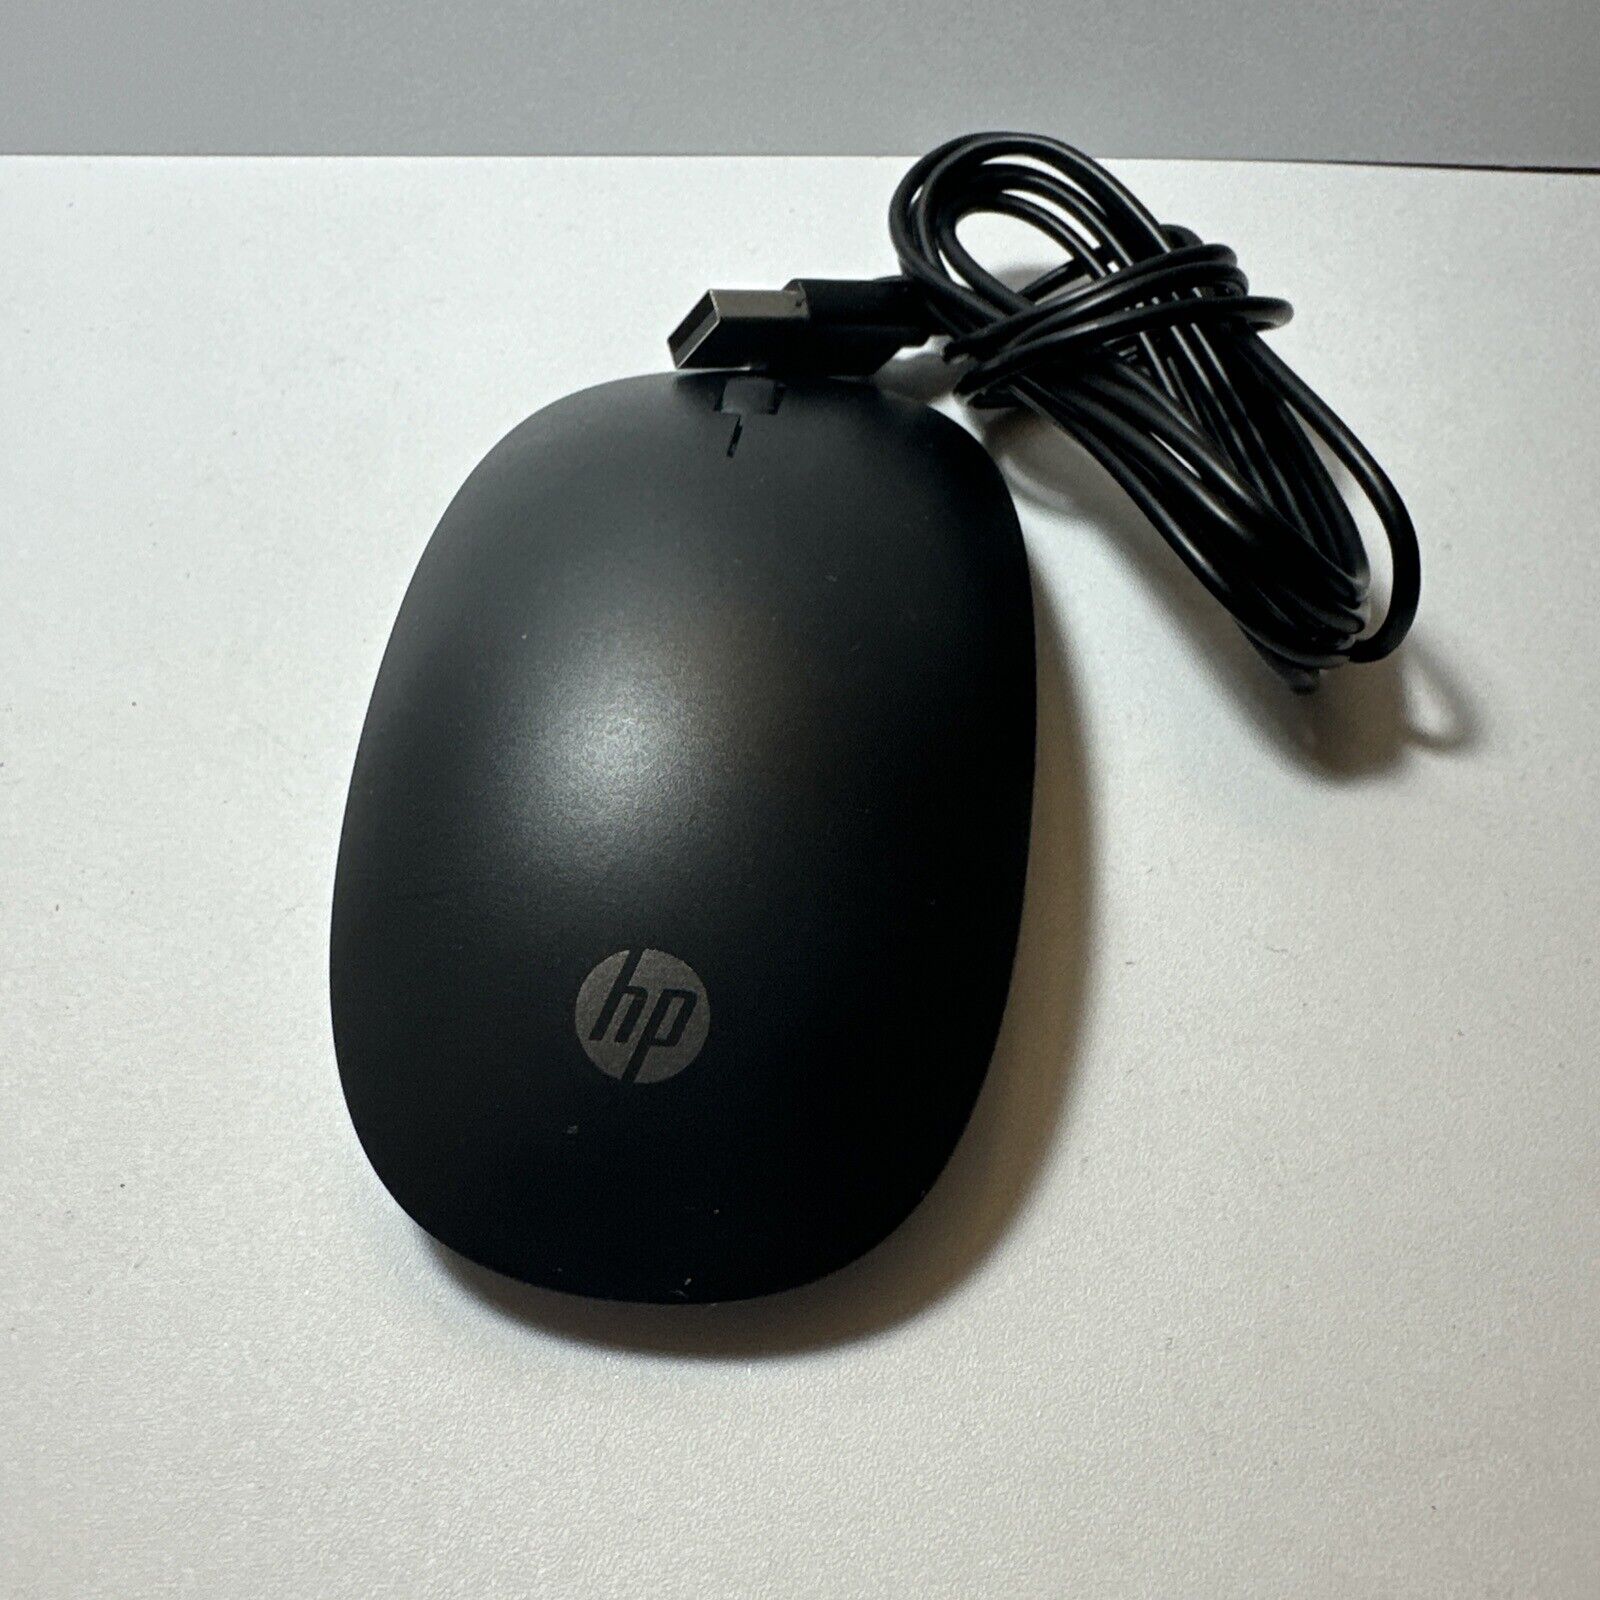 HP Wired Standard / Basic USB Computer Mouse Model Number: TPC - P001M - Tested